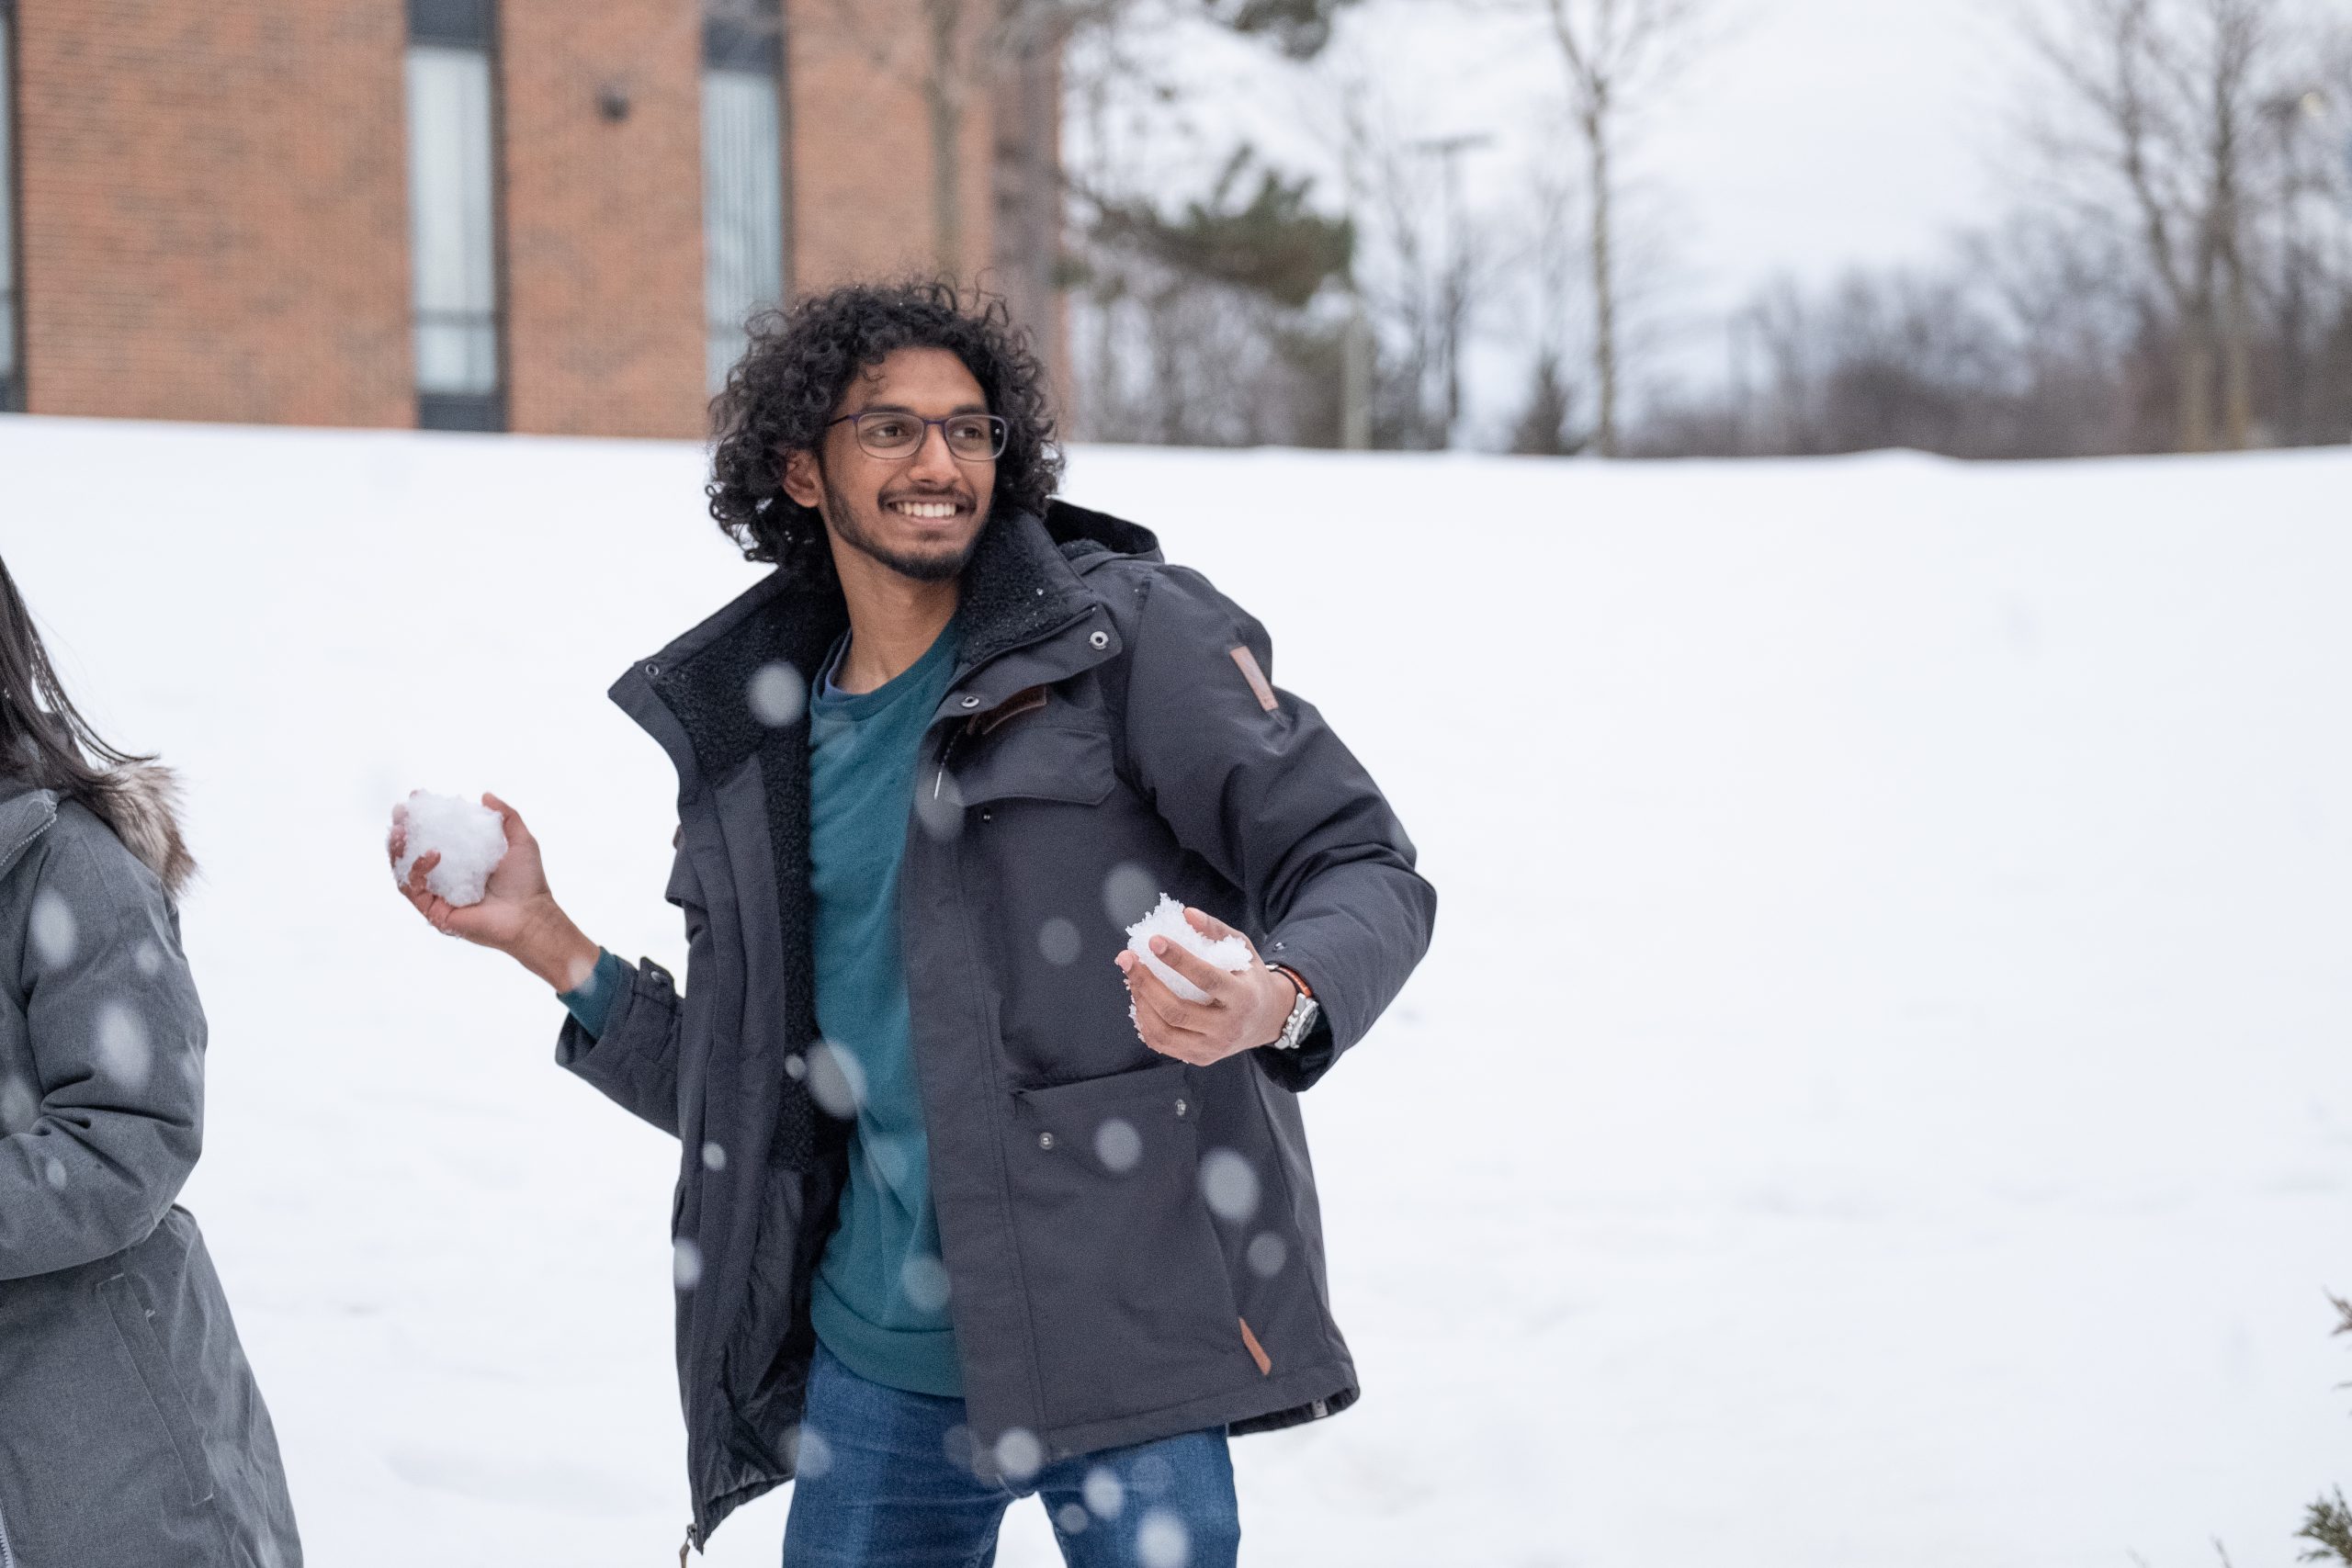 Man outside, participating in a snowball fight with a smile on face